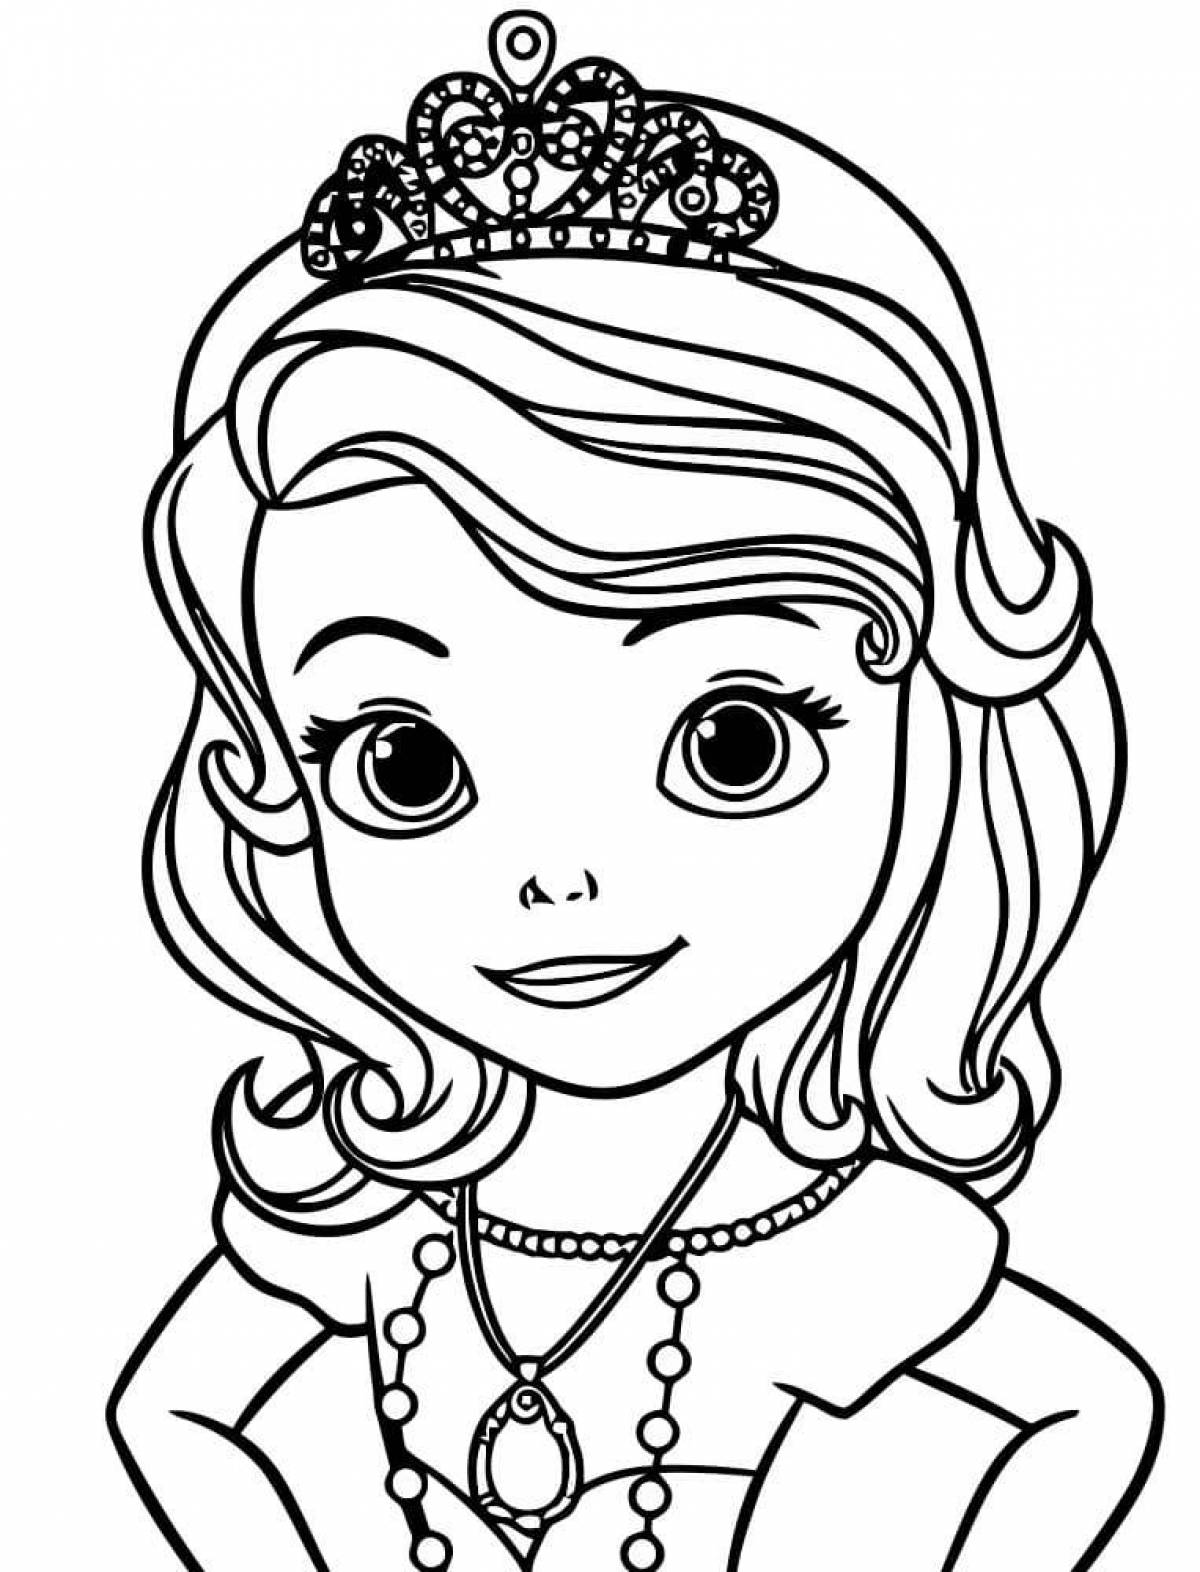 Fun princess coloring pages for kids